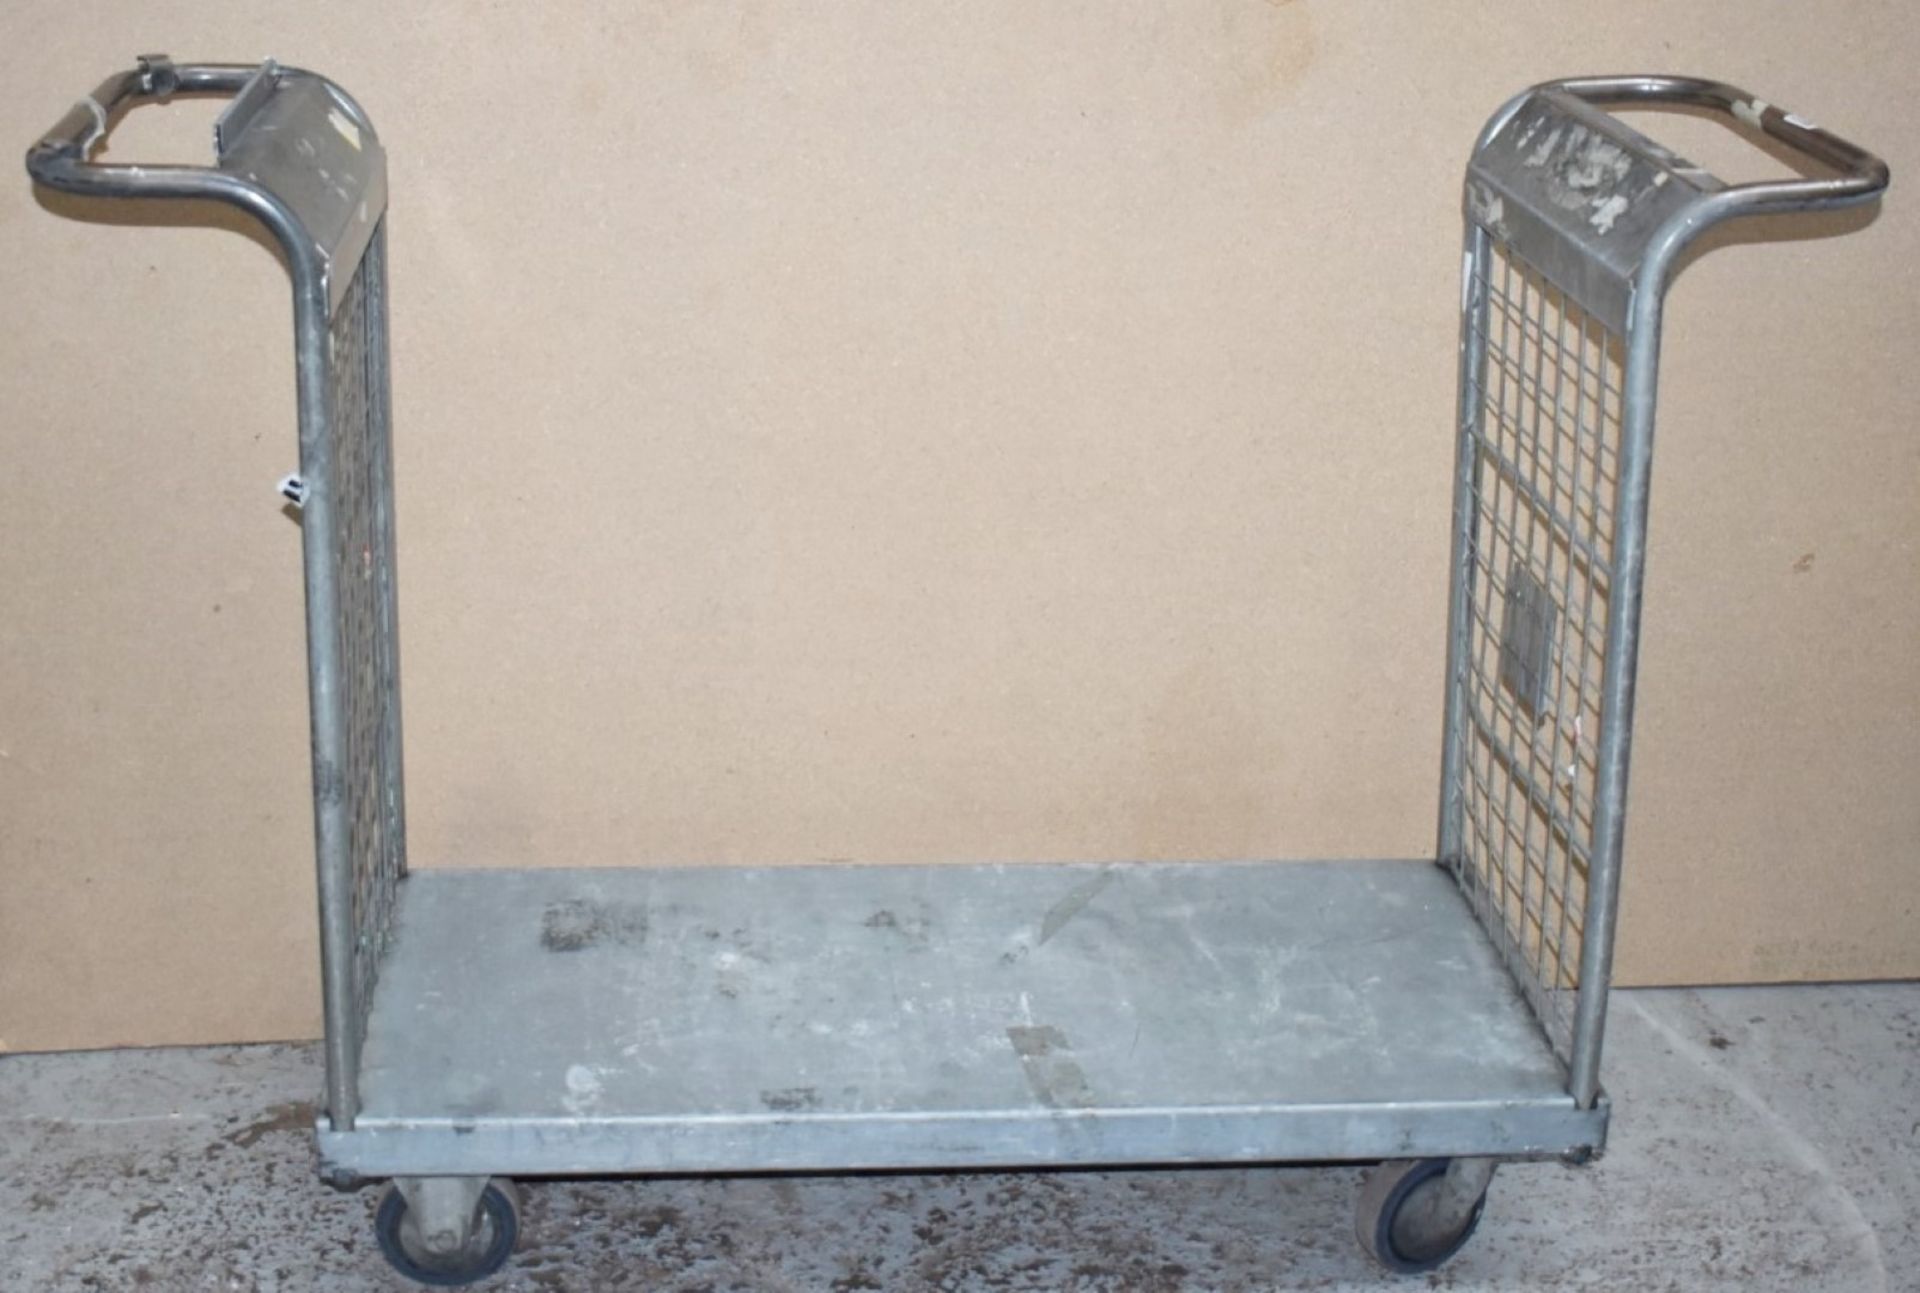 1 x Platform Trolley With Heavy Duty Wheels, Two Handles and Waste Bag Holder - Features a 100 x - Image 4 of 6